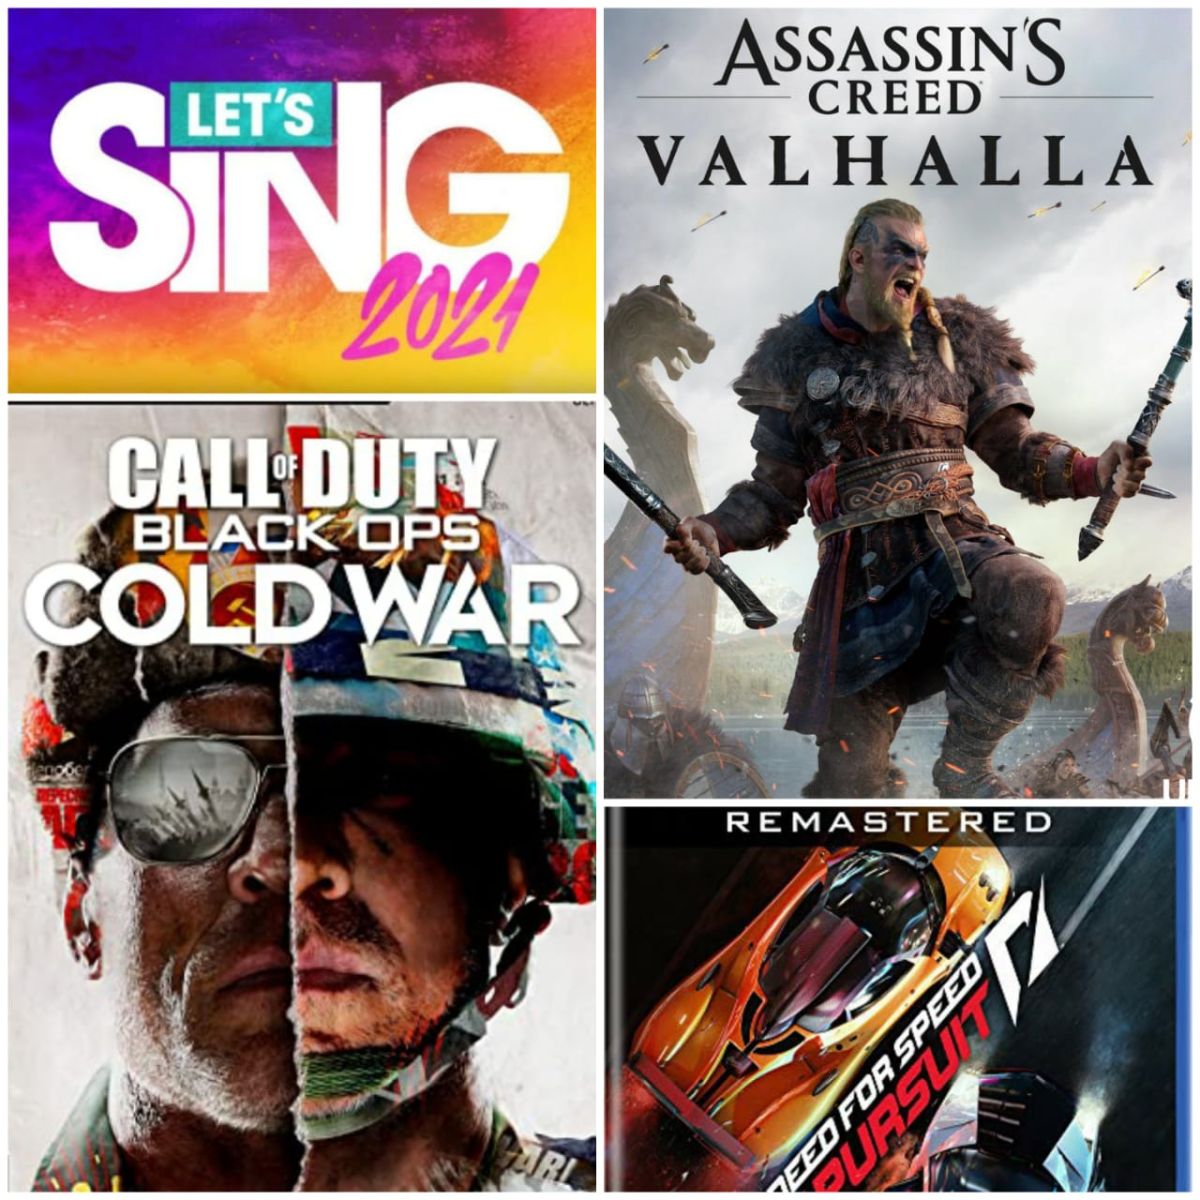 Review: Assassin’s Creed: Valhalla, Call of Duty: Black Ops Cold War, Let’s Sing 2021 and Need for Speed ​​Hot Pursuit Remastered